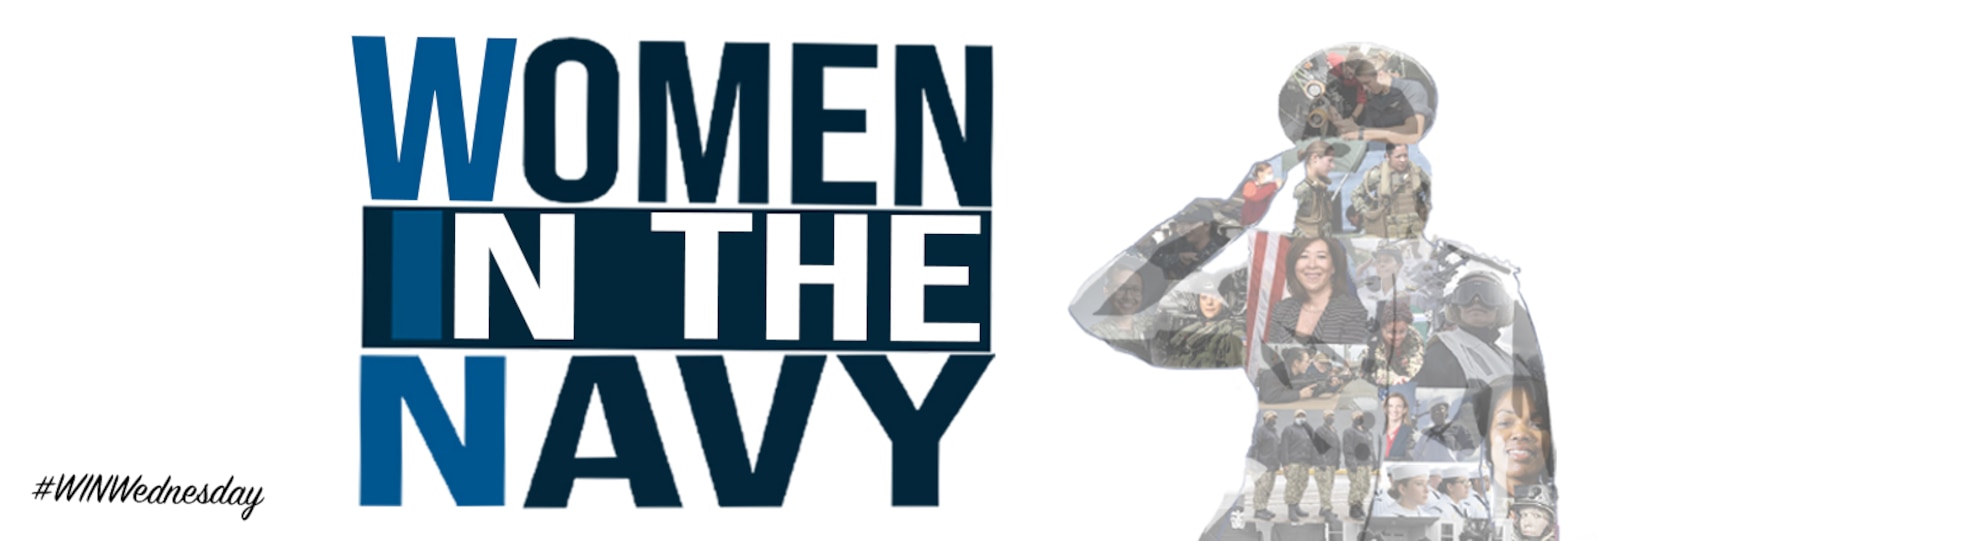 Women in the navy titled on the left. Silhouette of woman navy saluting on the right with bunch of images of women filled inside the silhouette .